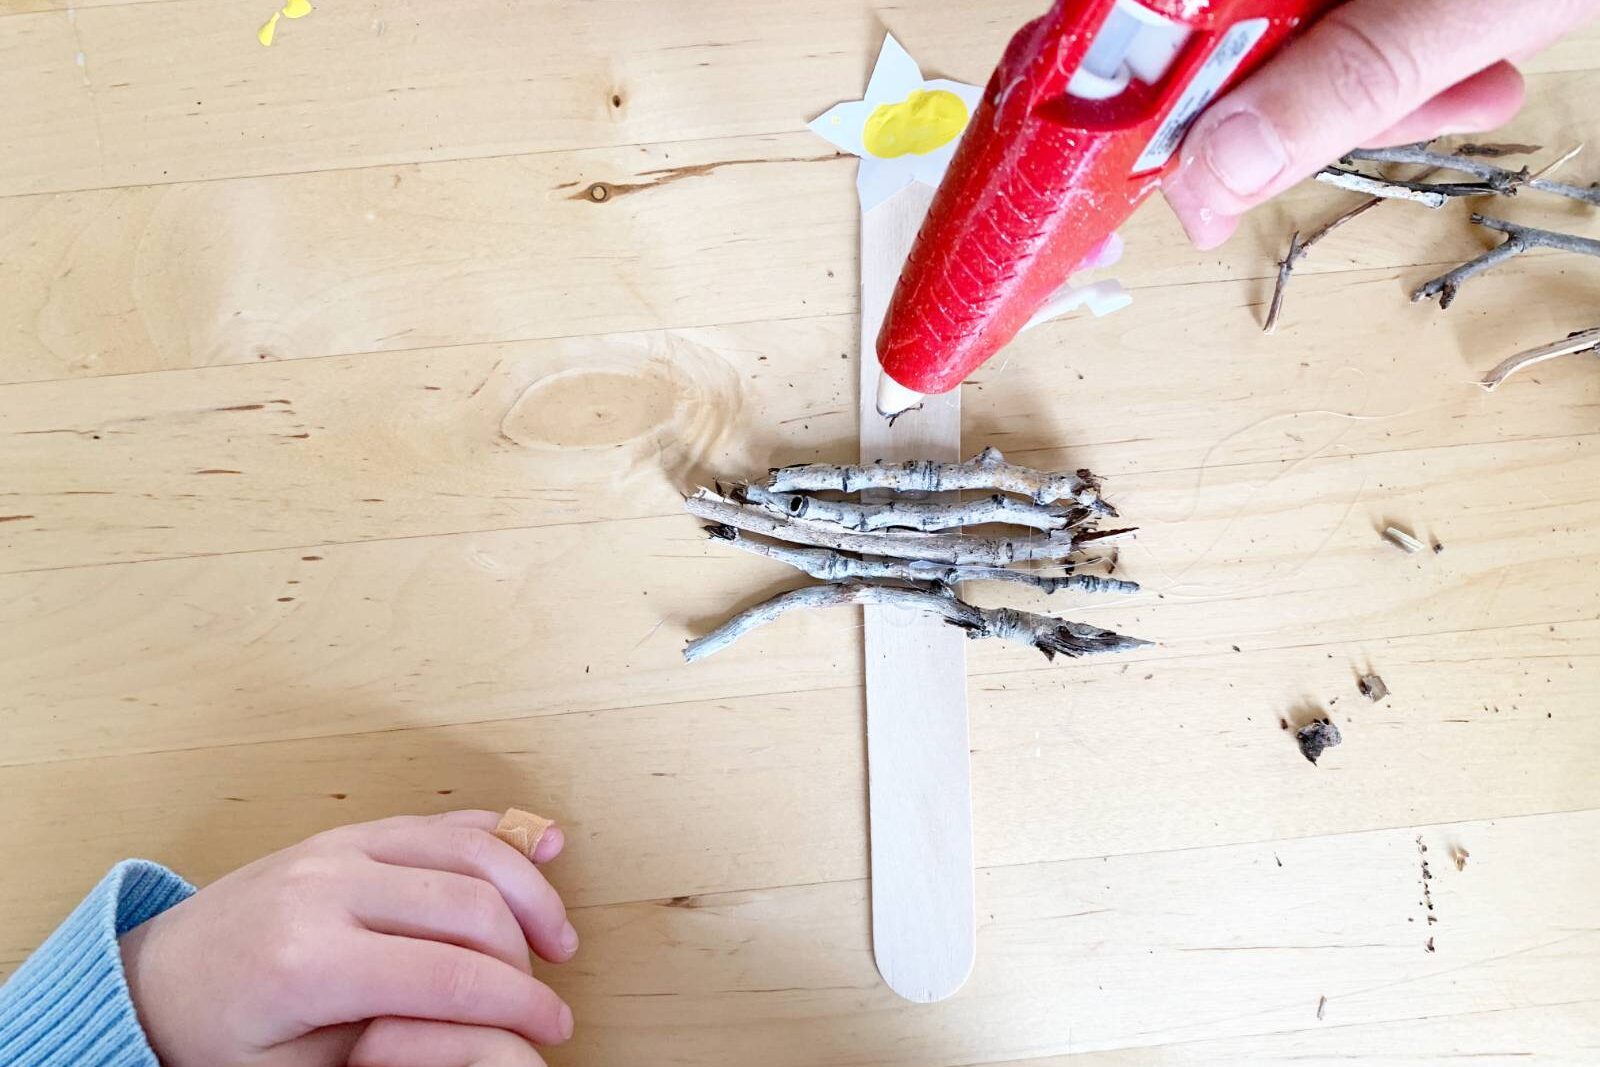 Hot glue sticks in order of size to create a rustic stick tree ornament for Christmas